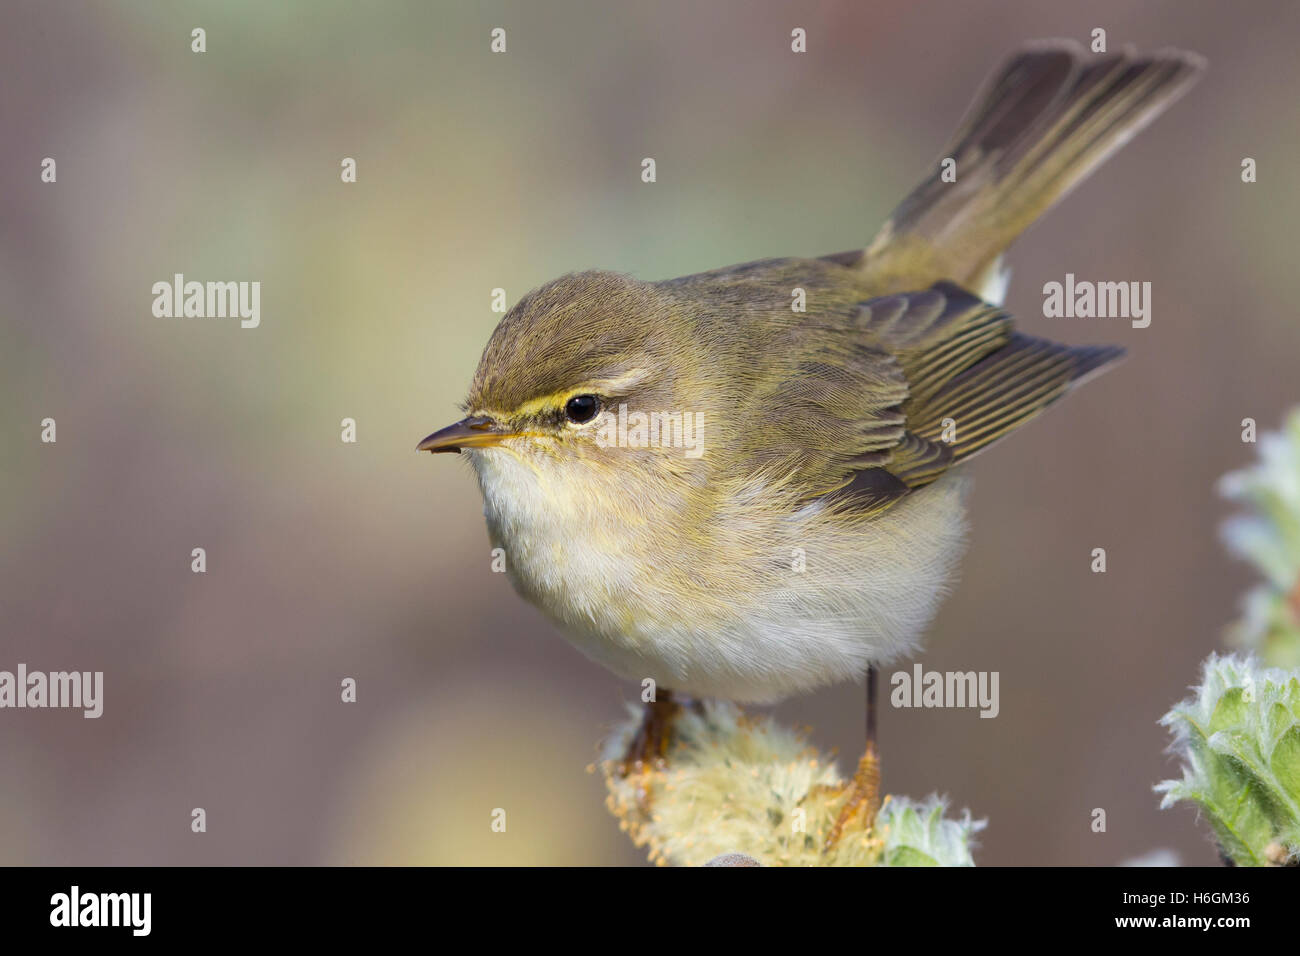 Willow Warbler (Philloscopus trochilus acredula), adult perched on a branch Stock Photo